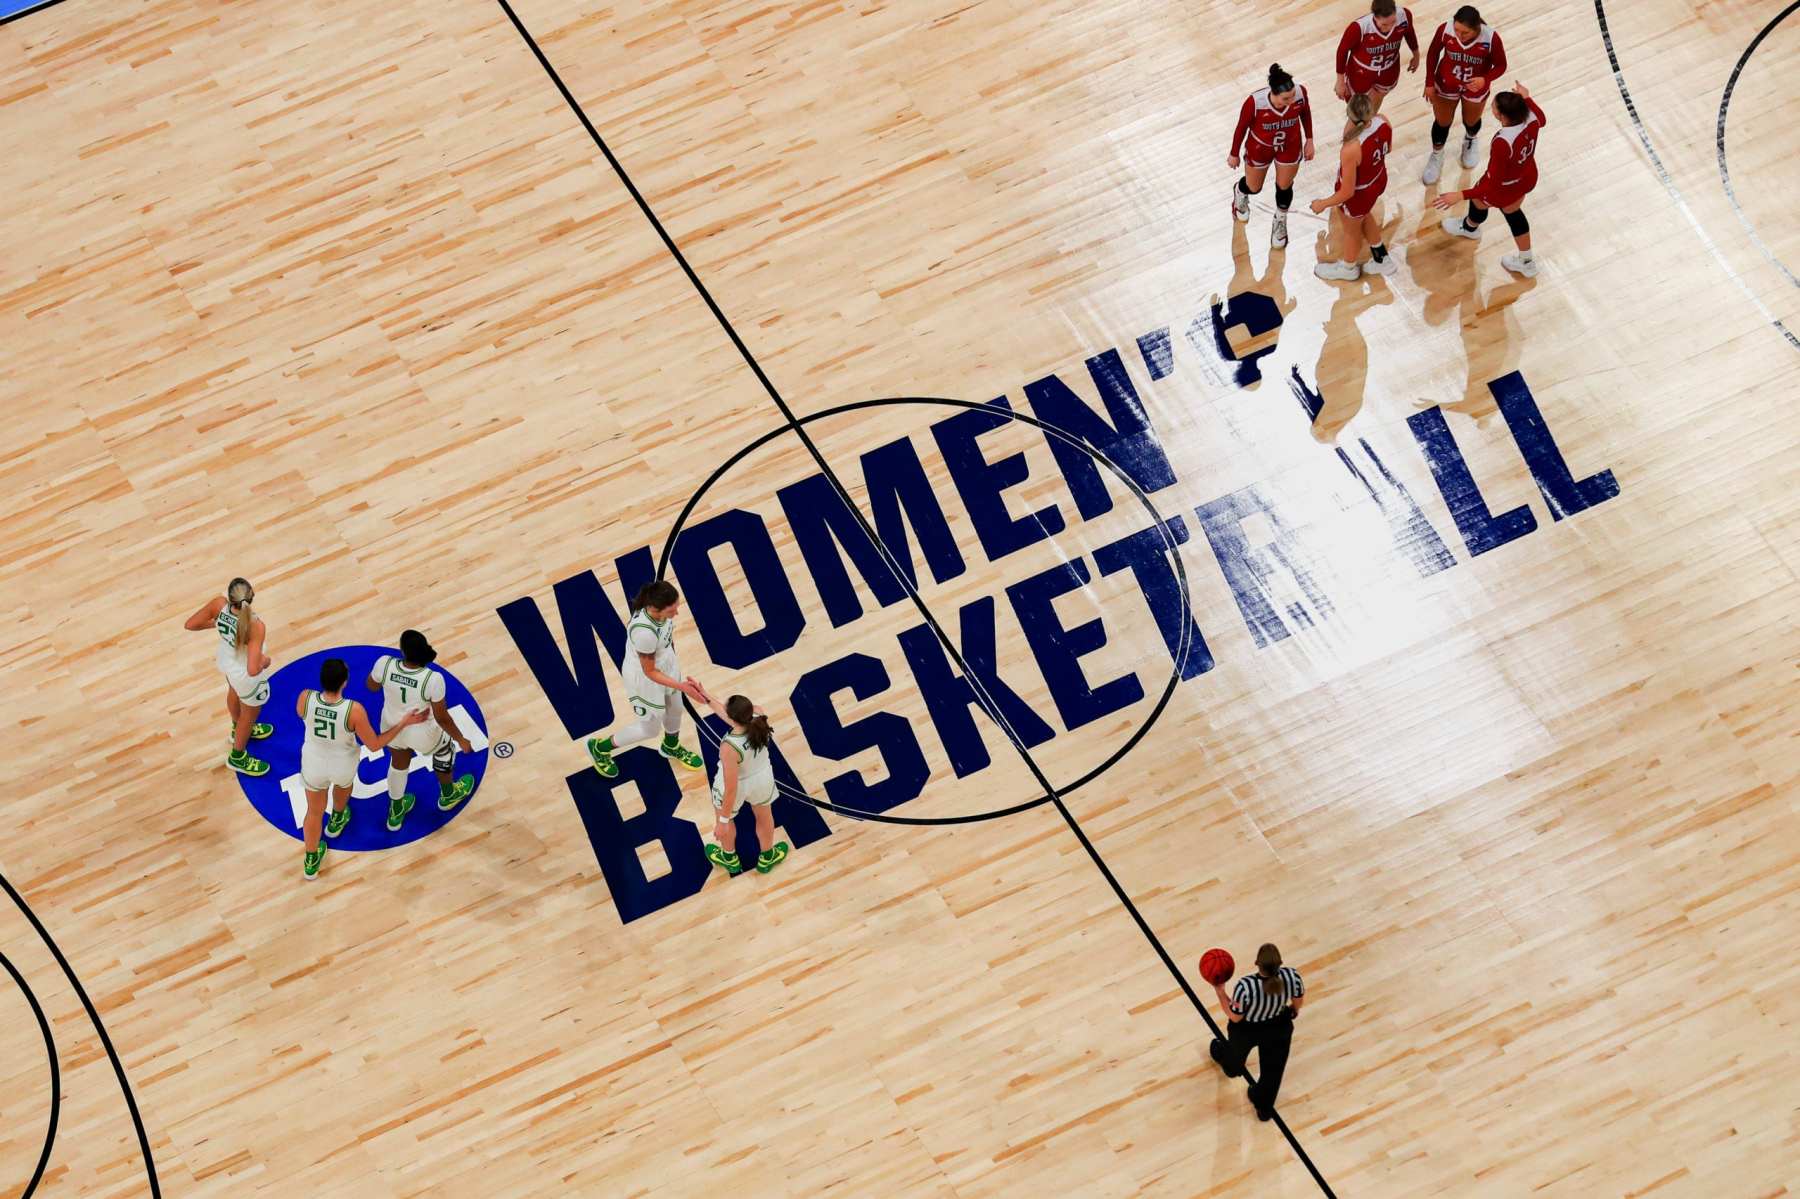 The South Dakota Coyotes and the Oregon Ducks in the first round game of the 2021 NCAA Women's Basketball Tournament at the Alamodome on March 22, 2021 in San Antonio, Texas.